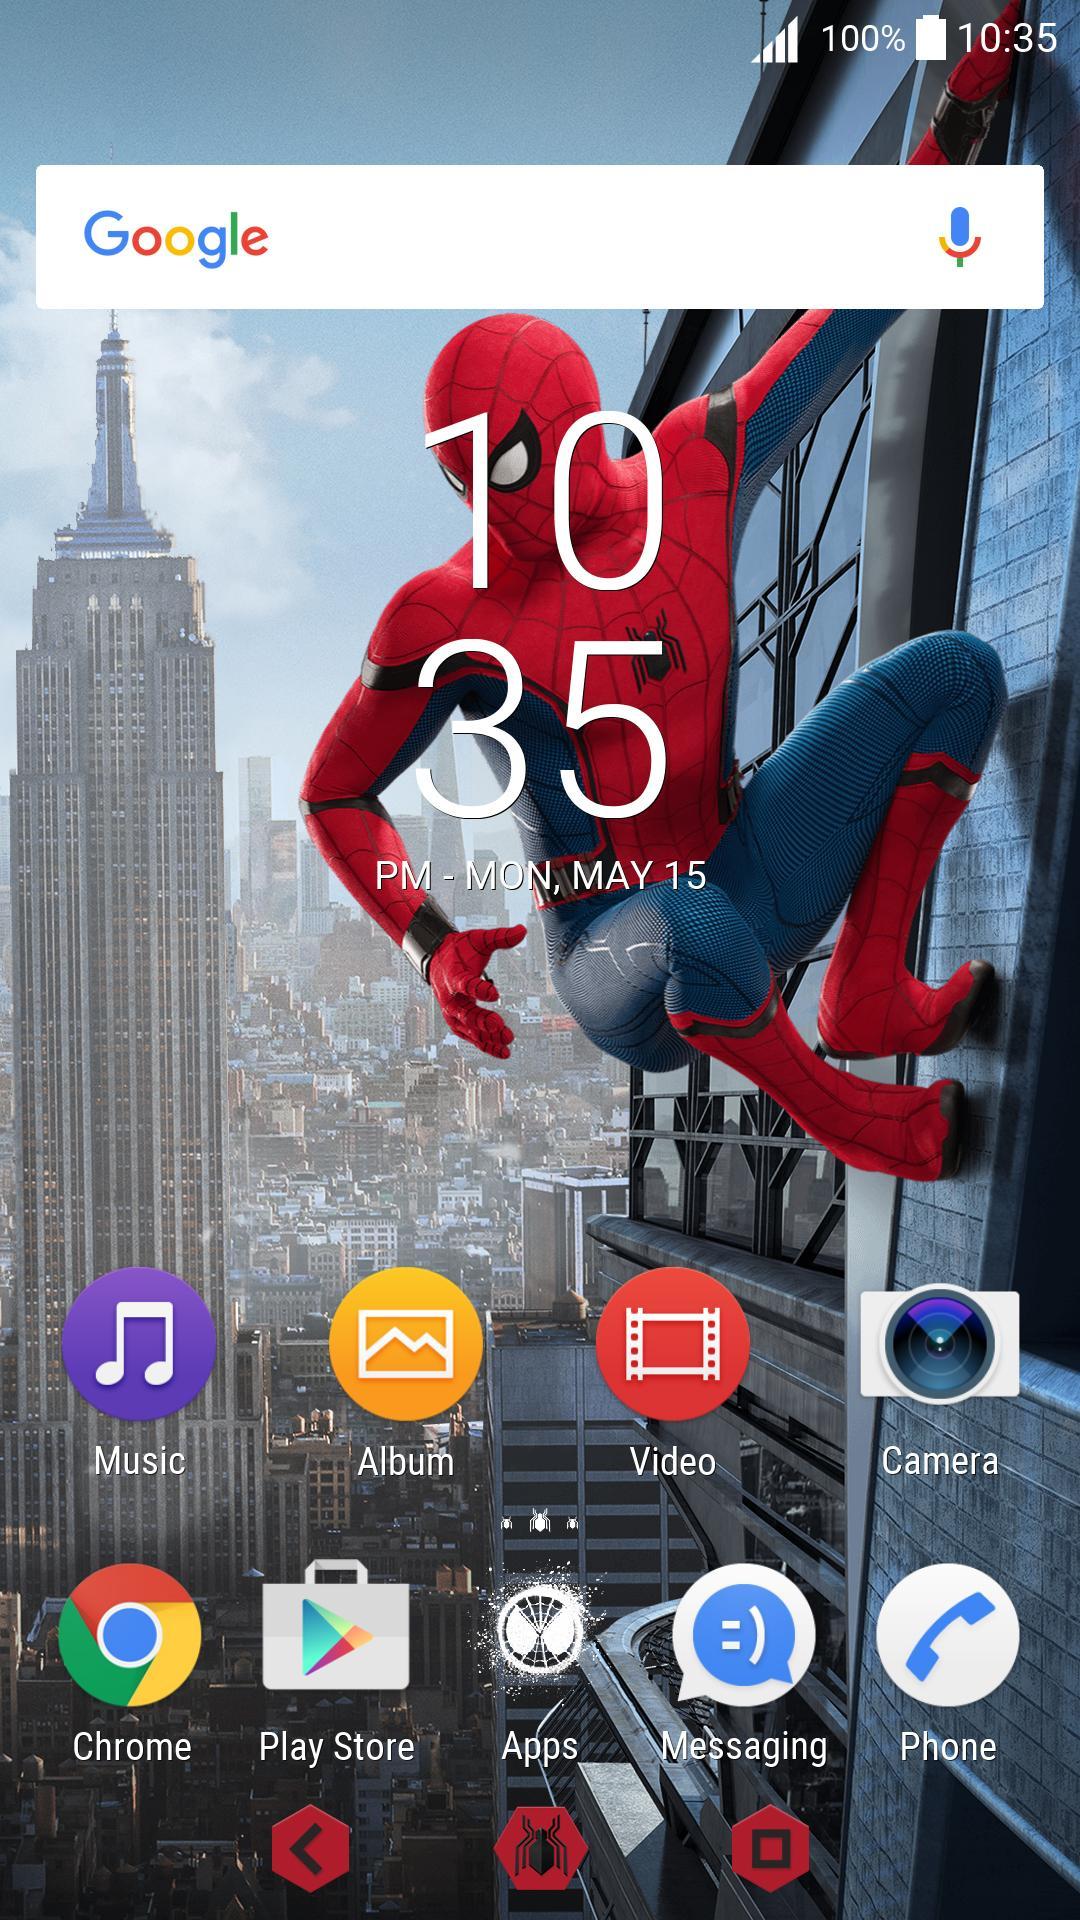 Android 用の Xperia Spider Man Homecoming Theme Apk をダウンロード